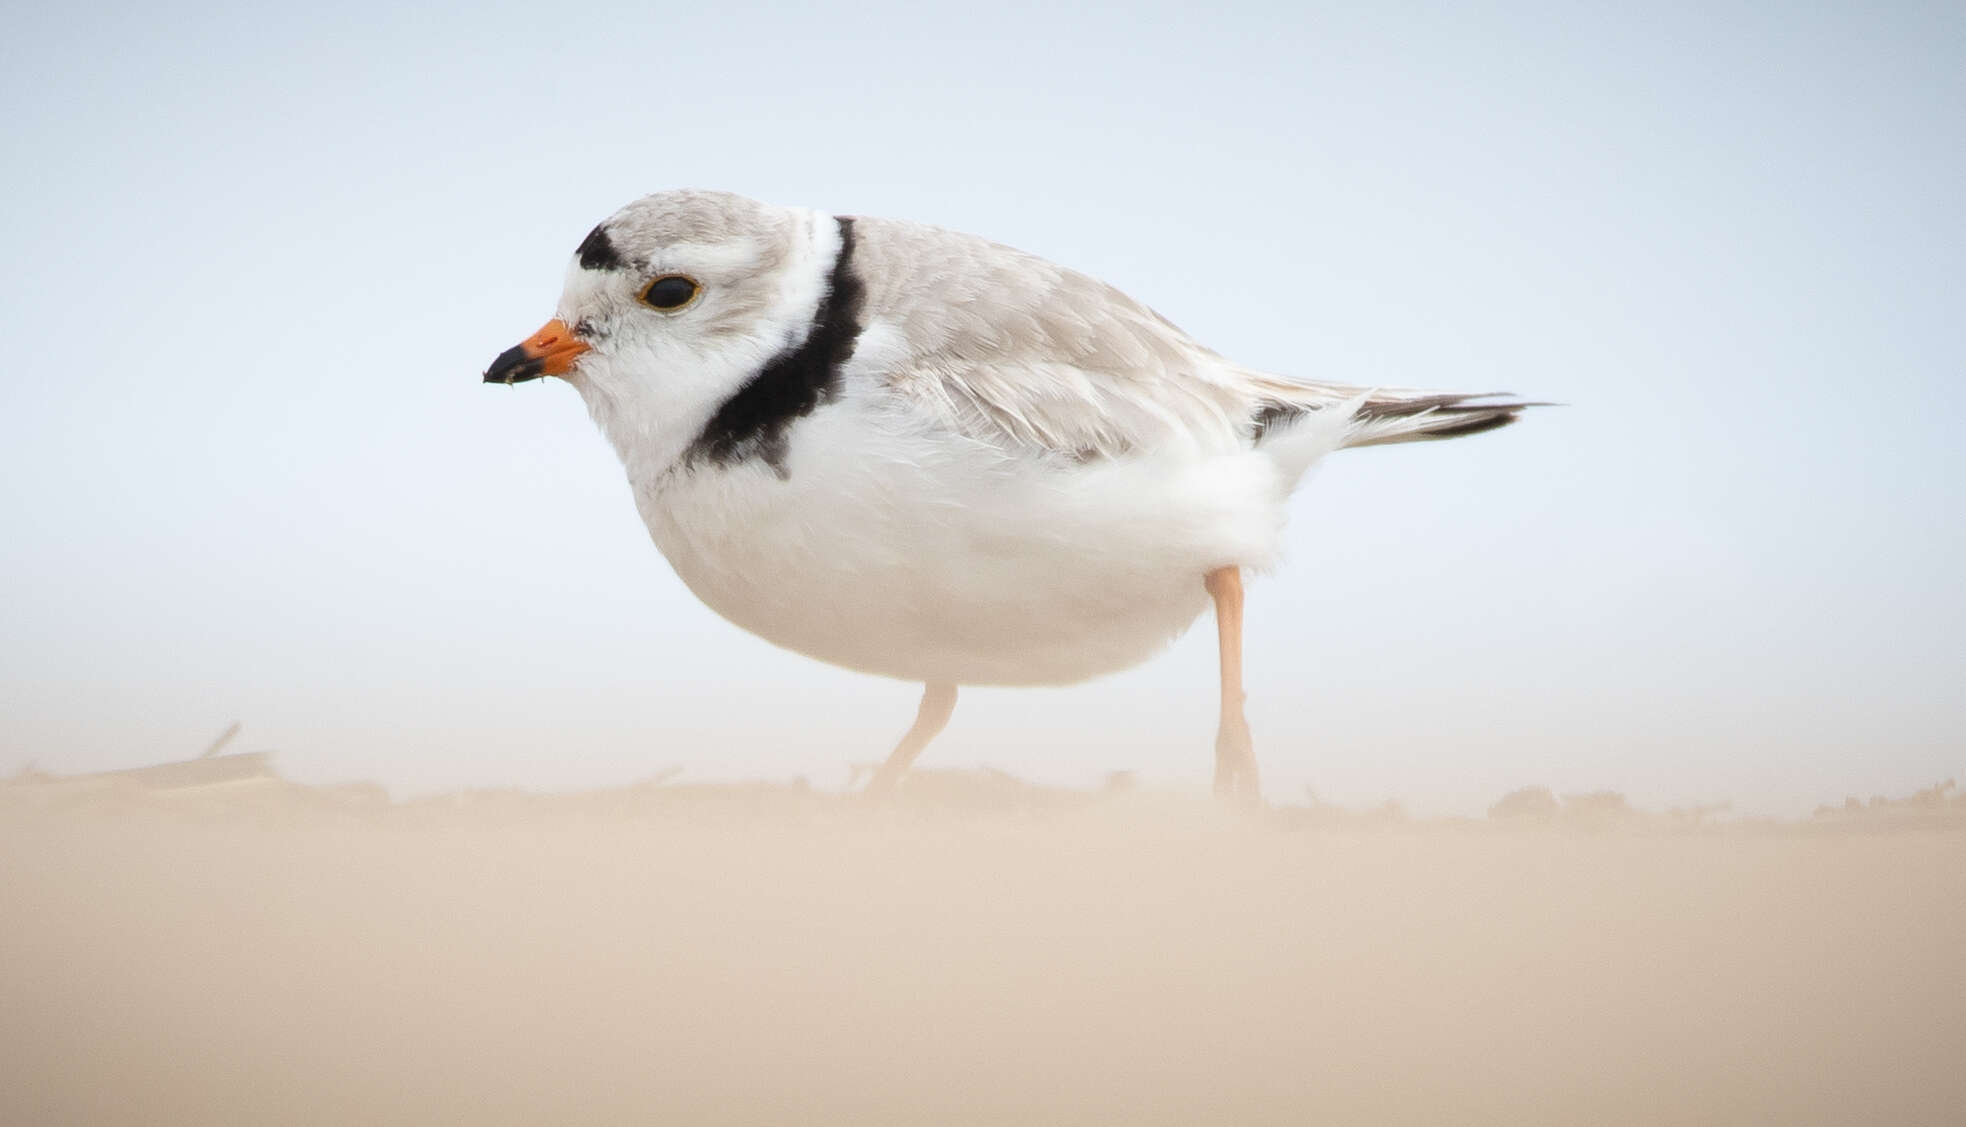 Image of Piping Plover